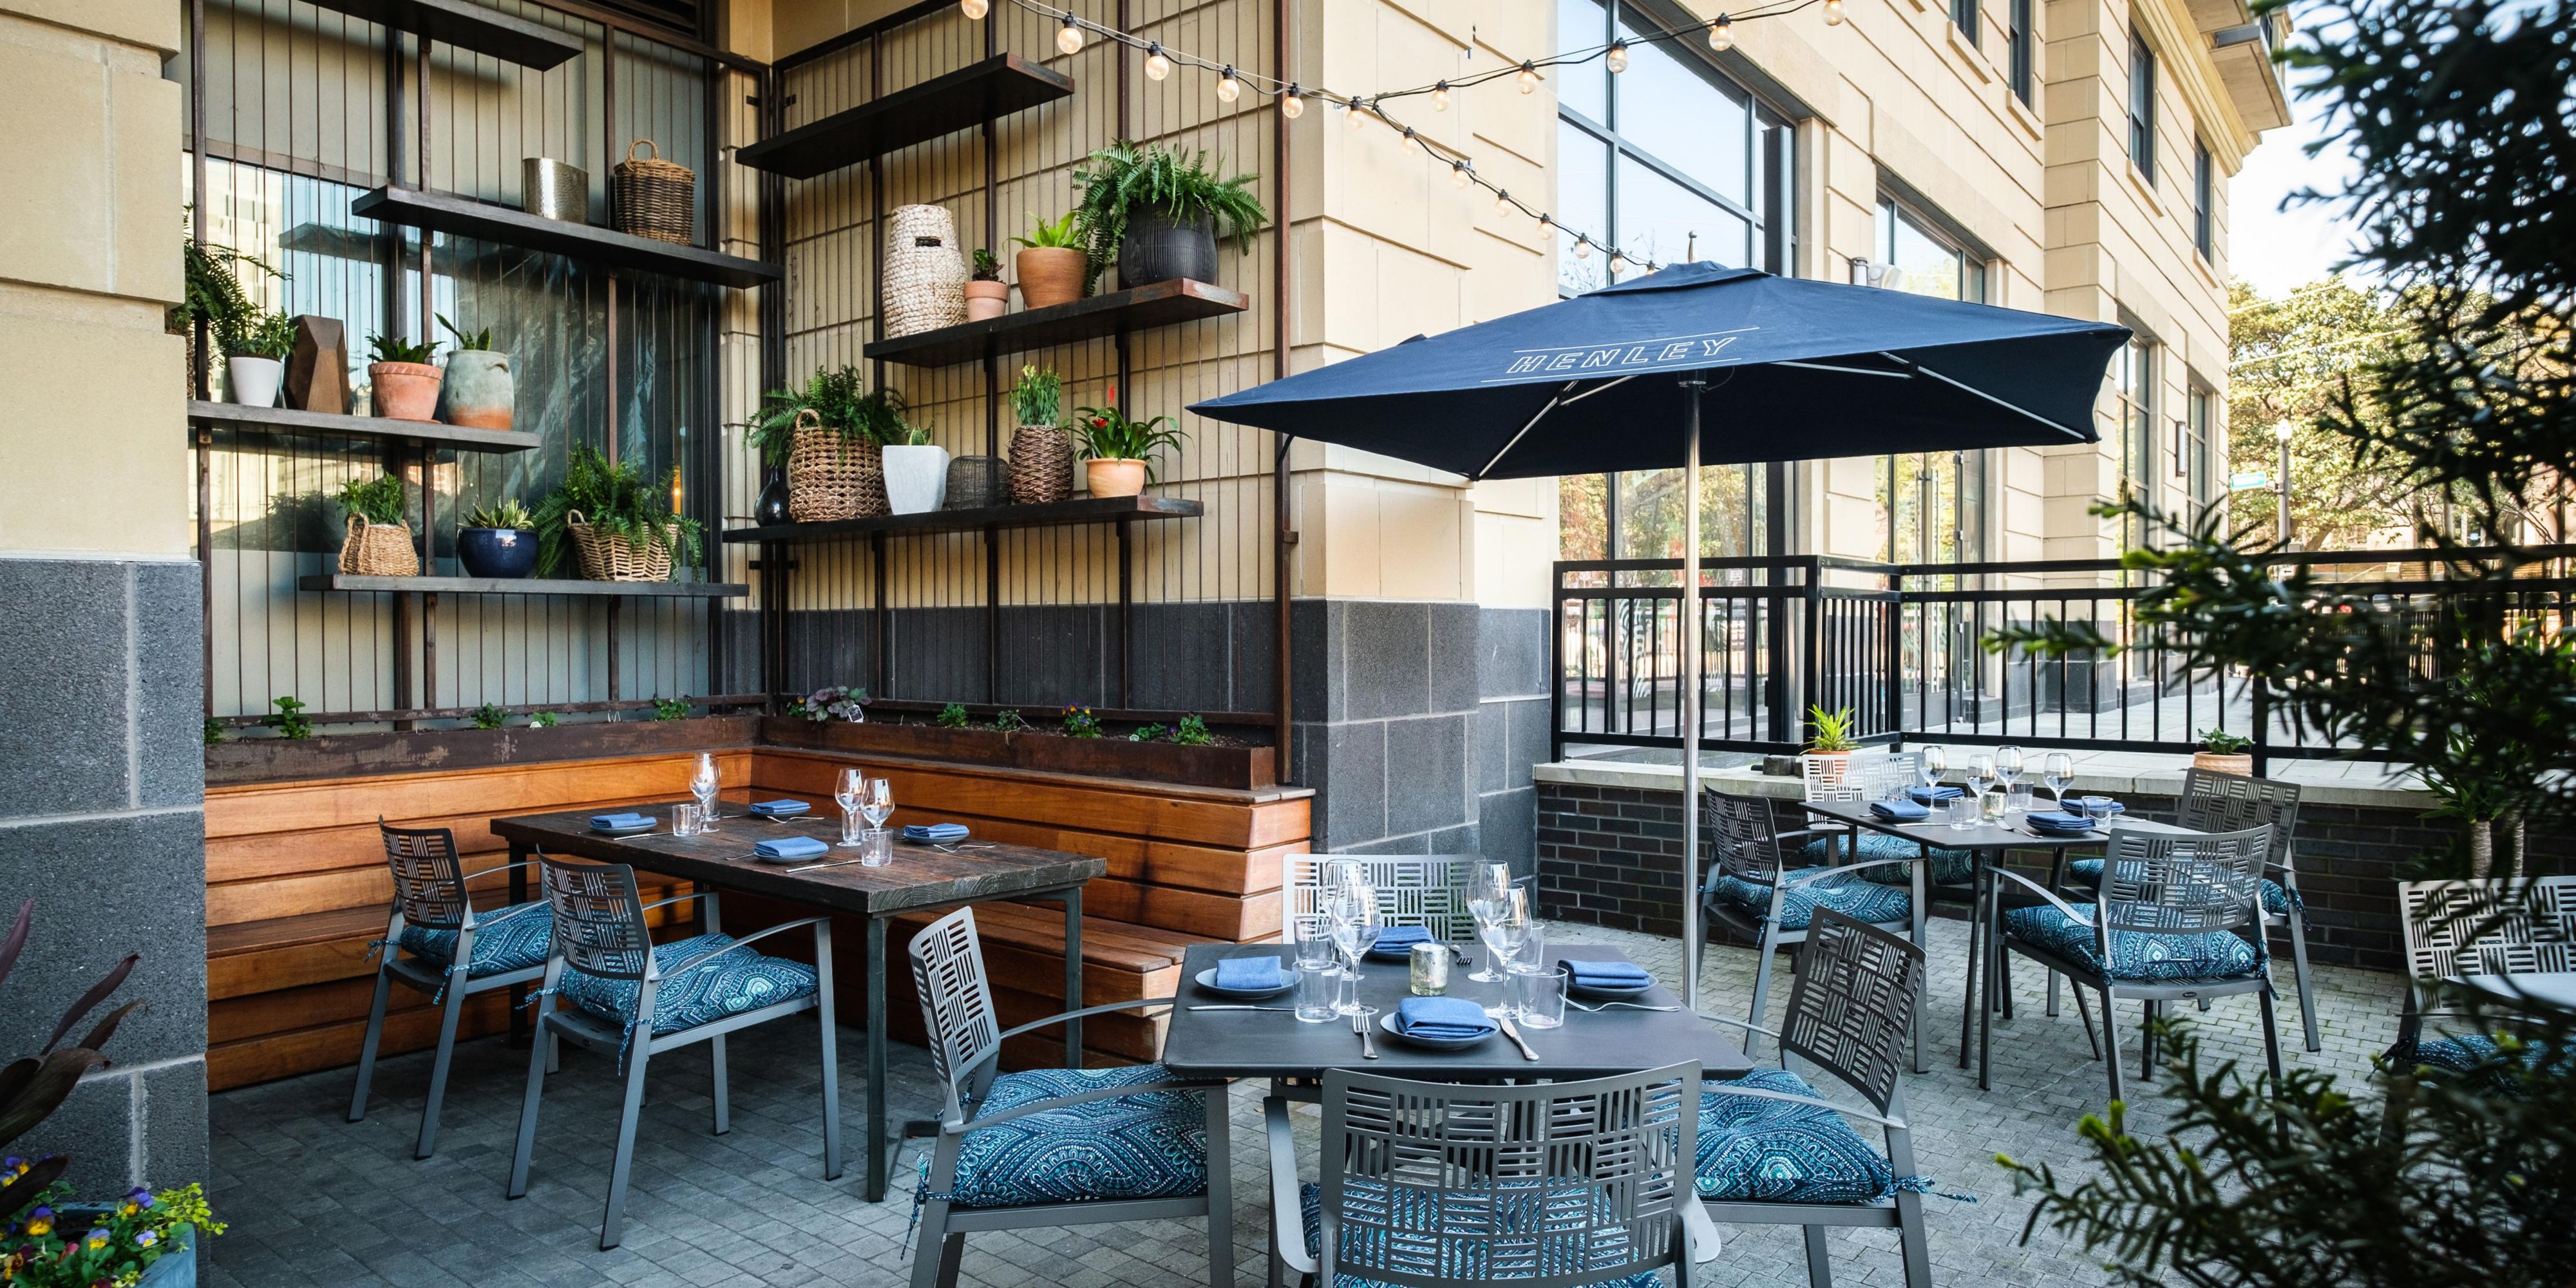 There's no better place to take in the warm breeze of a Nashville evening that the Henley patio. Home to a living wall and our chef's own herb garden, the terrace bustles with the buzz of Midtown, from Sunday brunch to midweek happy hour and late into the night.